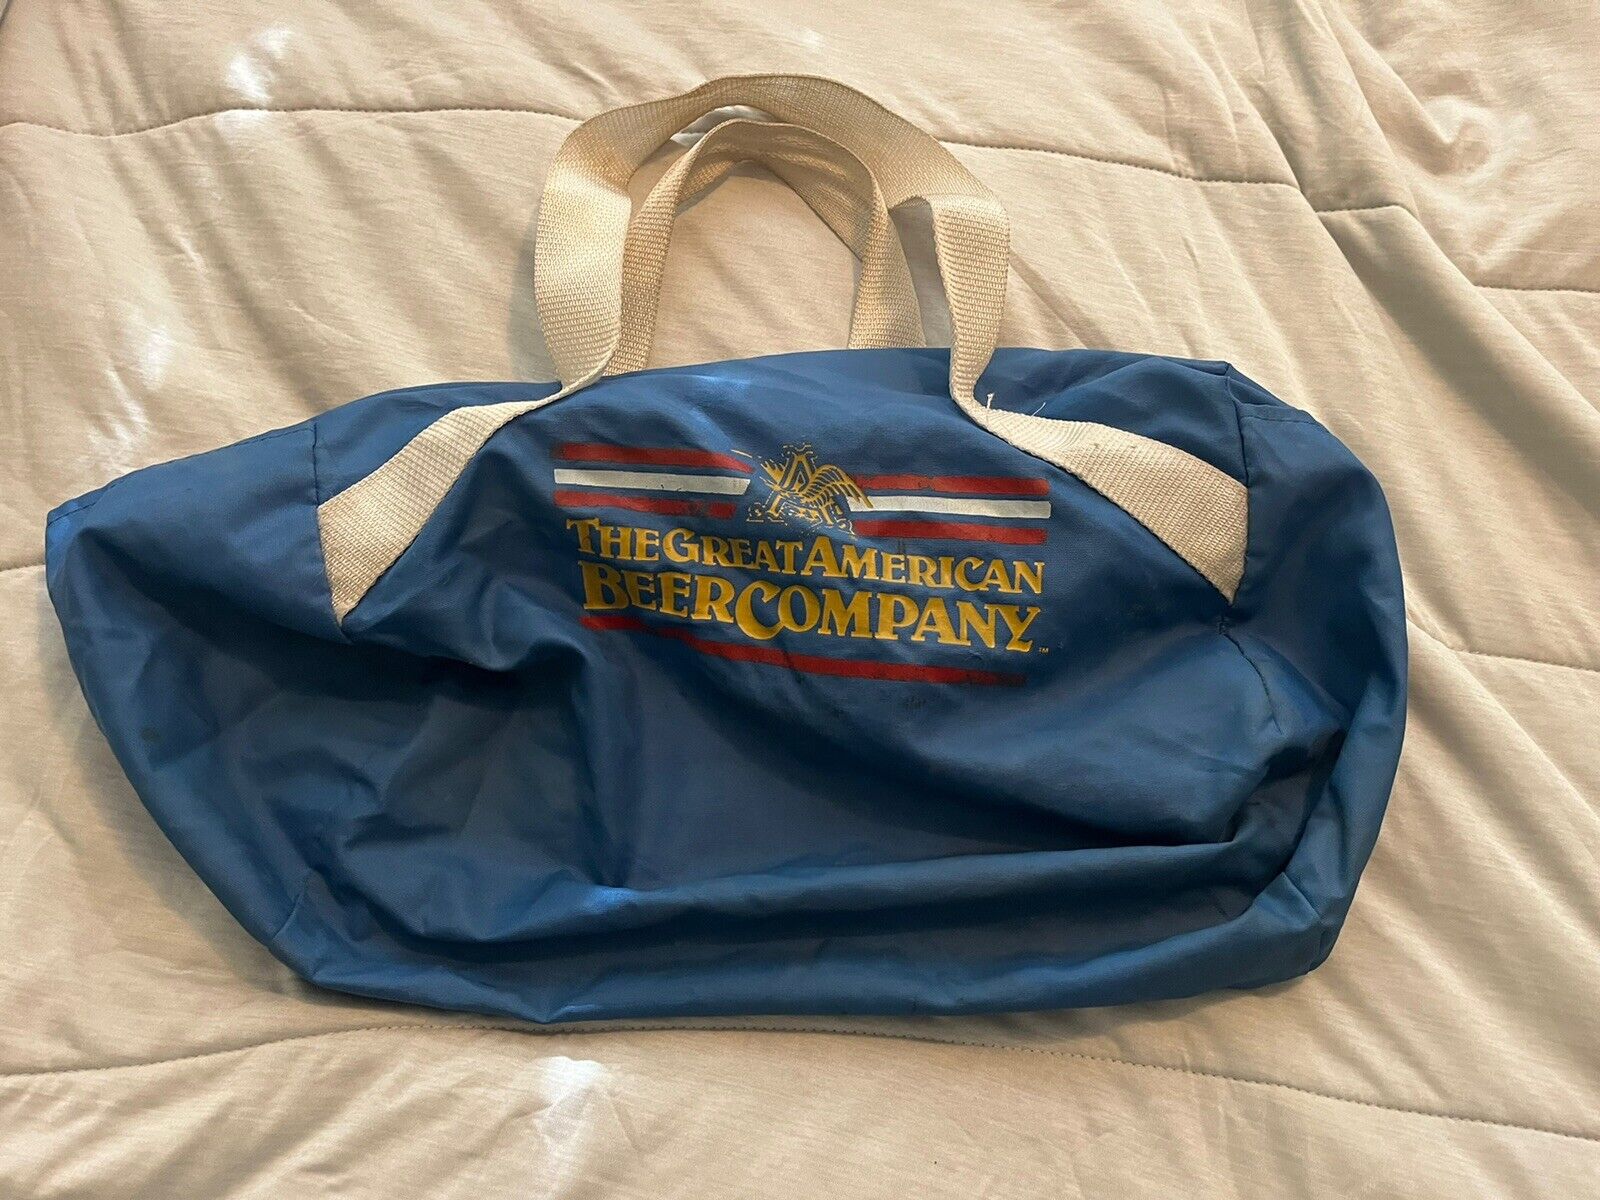 Vintage AB Great American Beer Company Duffel Bag Anheuser Busch Blue